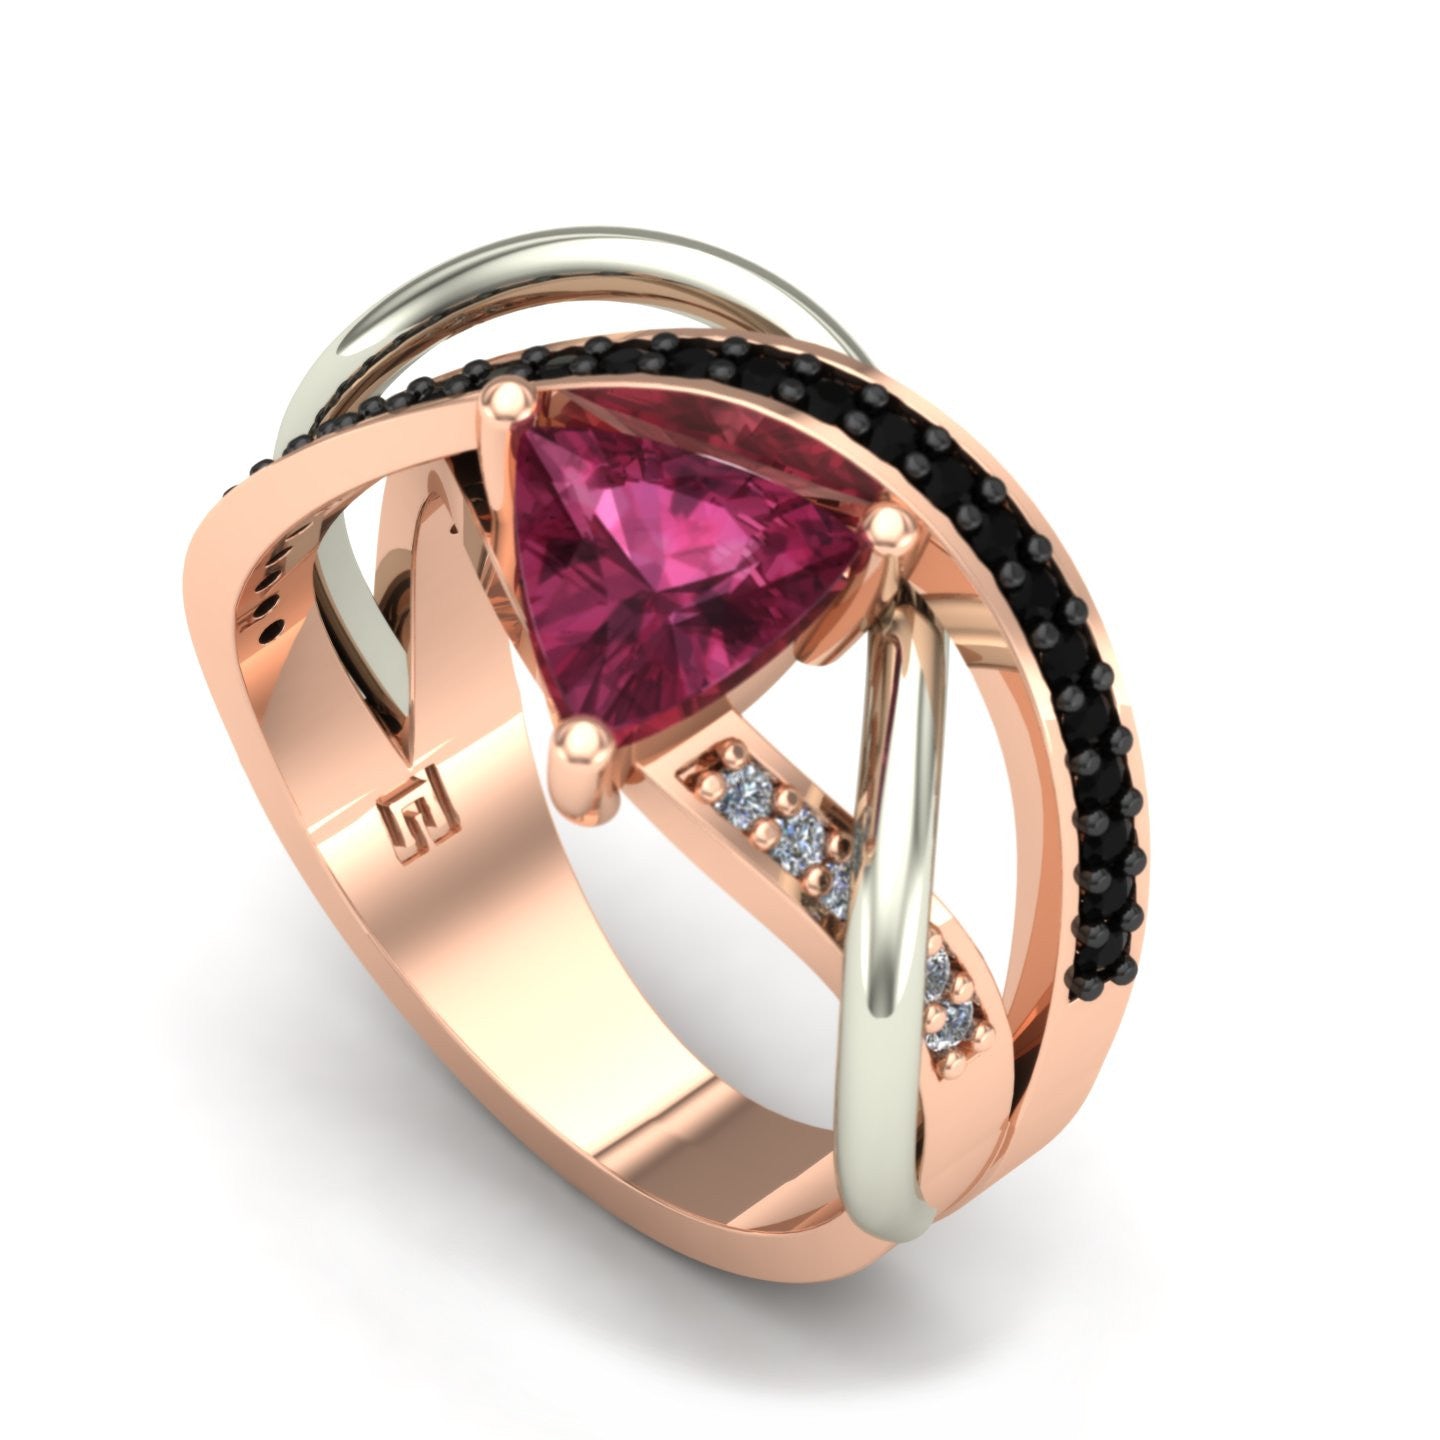 trillion pink tourmaline and diamond two tone abstract ring in 14k rose and white gold - Charles Babb Designs